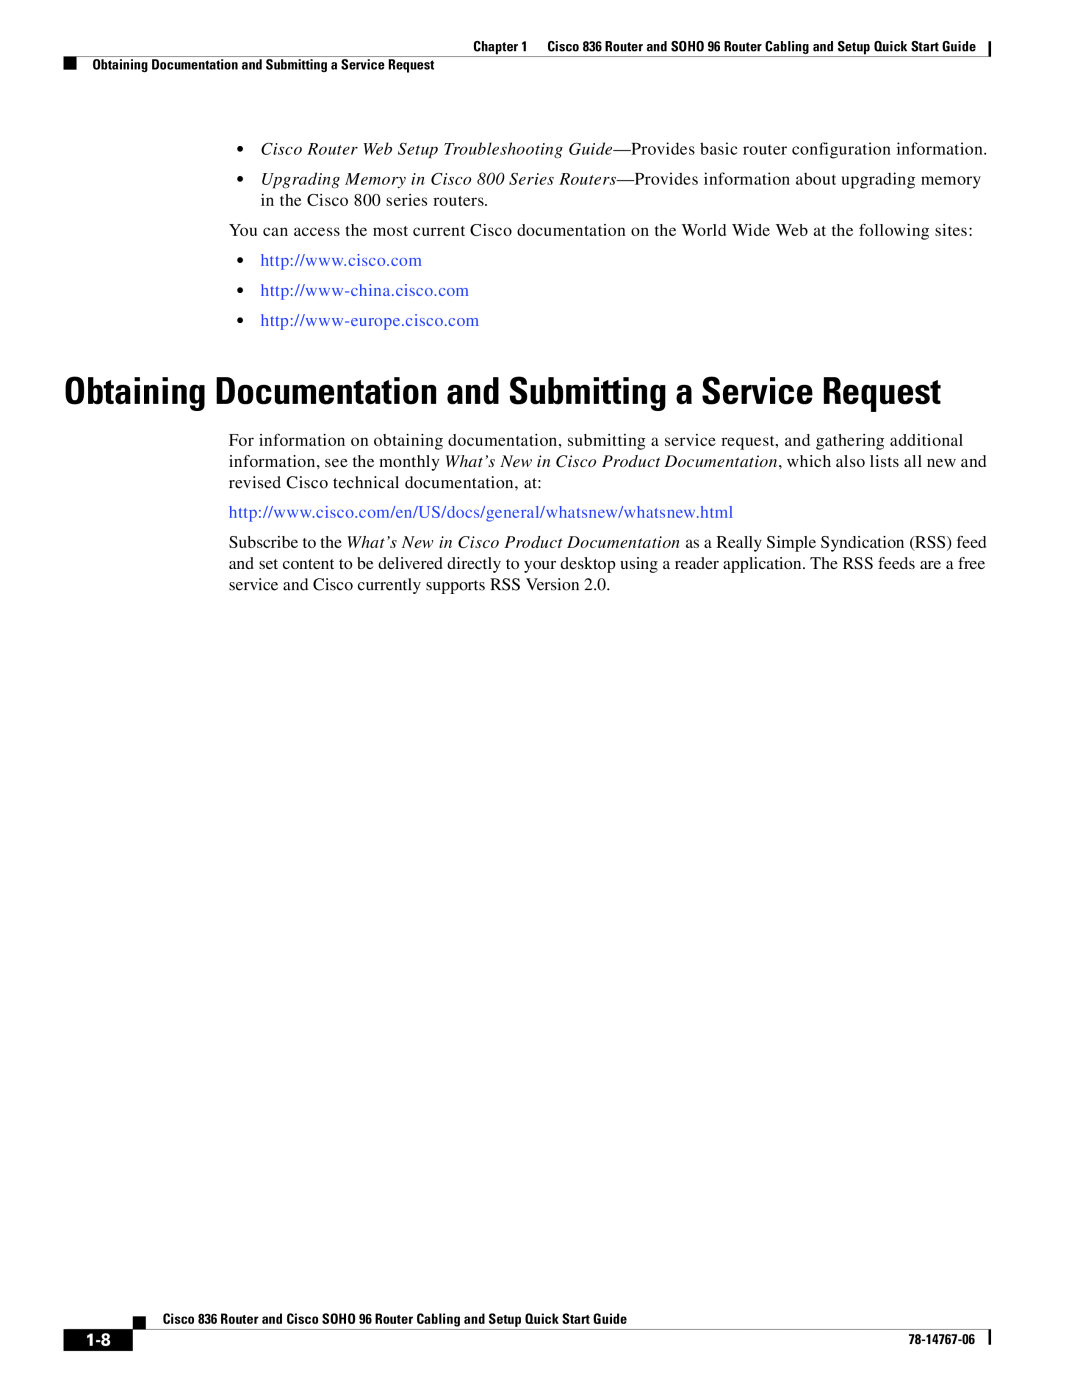 Cisco Systems SOHO 96 quick start Obtaining Documentation and Submitting a Service Request 